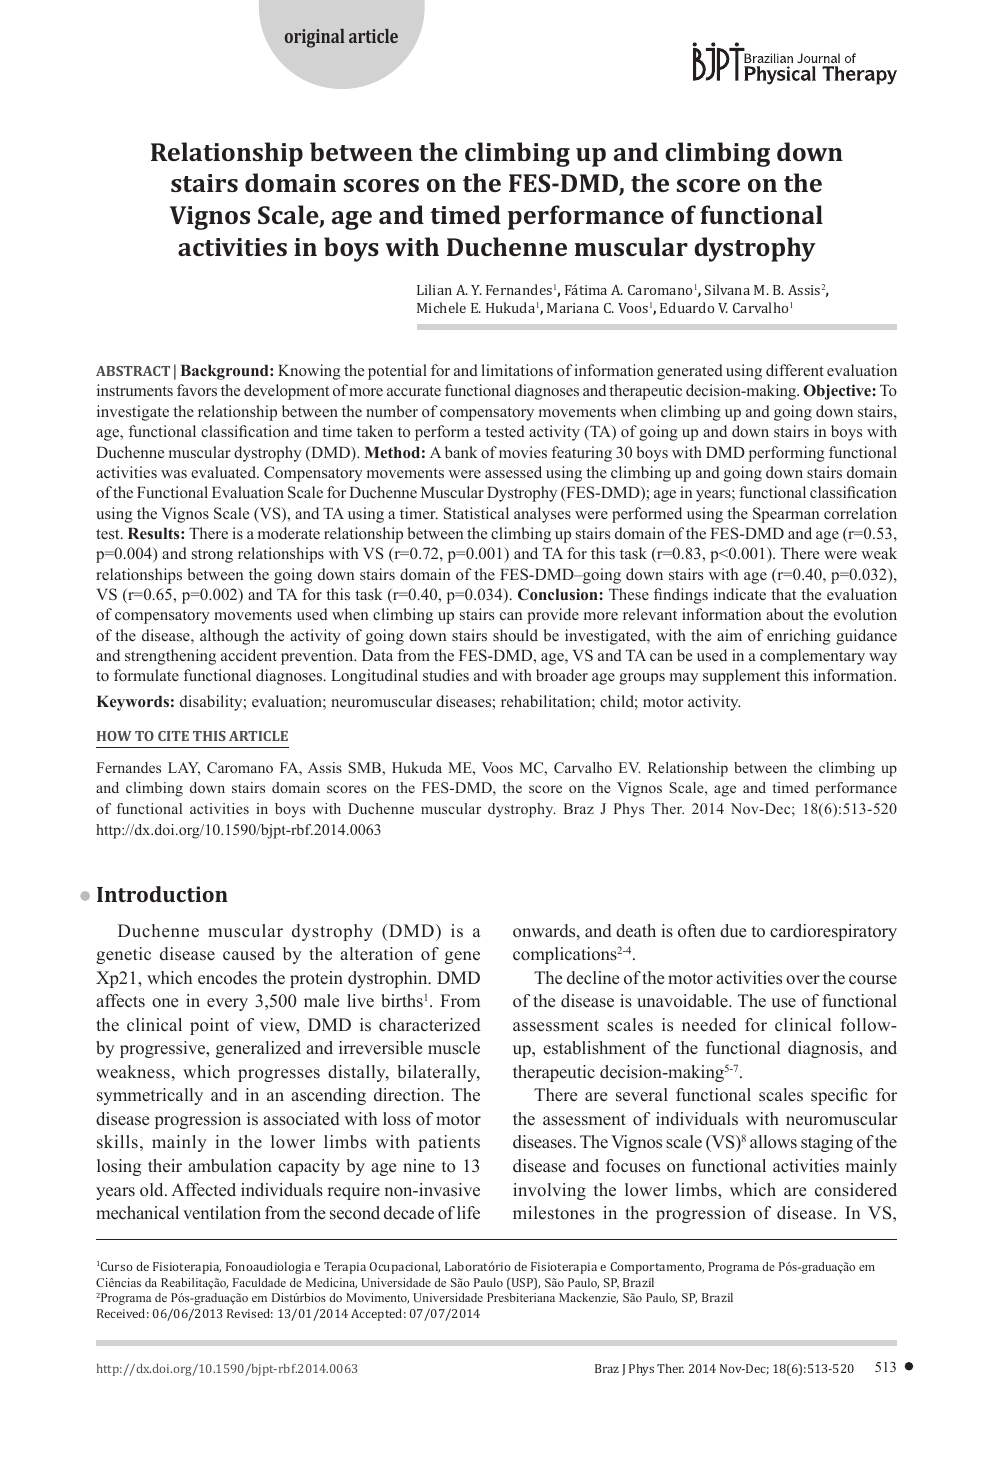 PDF) Elaboration and reliability of functional evaluation on going up and  downstairs scale for Duchenne Muscular Dystrophy